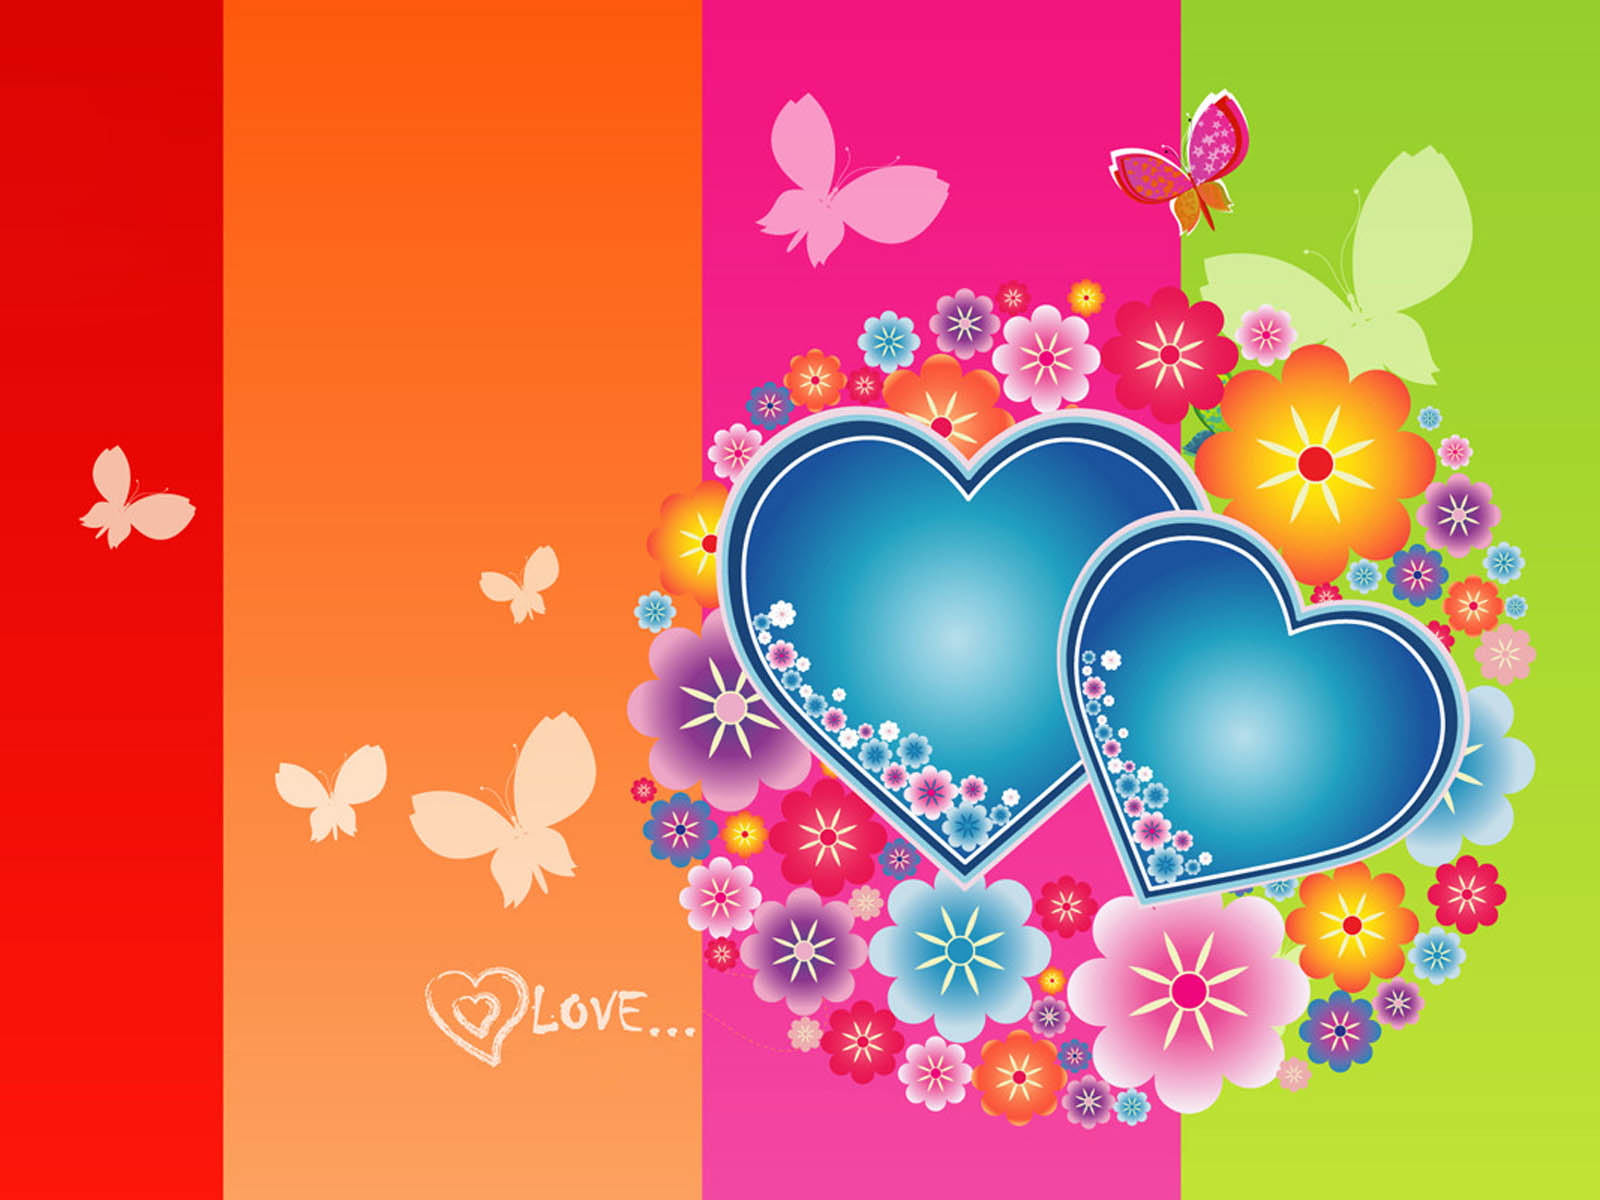 Tag Love Heart Wallpapers Images Photos Pictures and Backgrounds 1600x1200